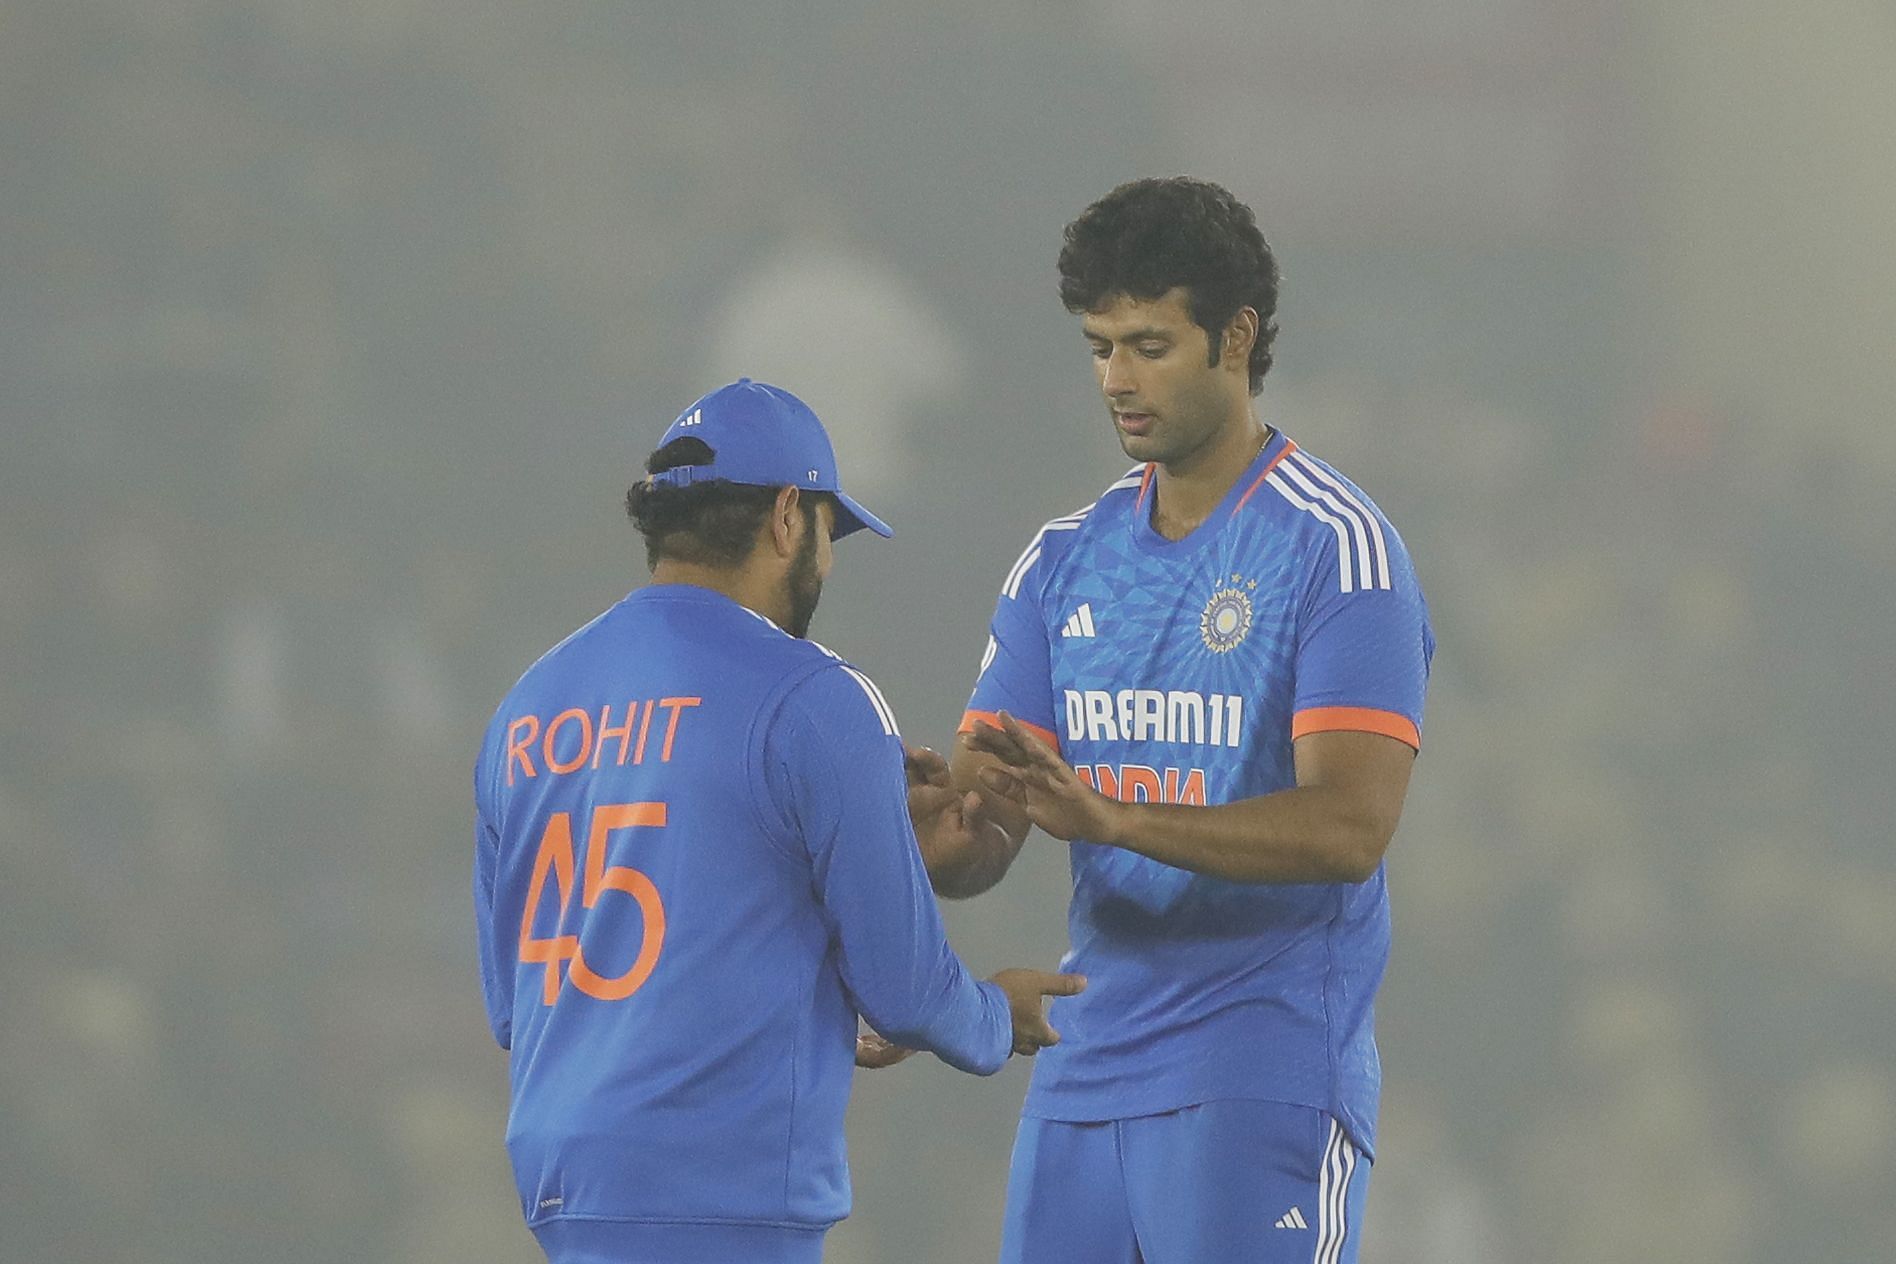 Shivam Dube (right) was asked to bowl the 19th over by Rohit Sharma.